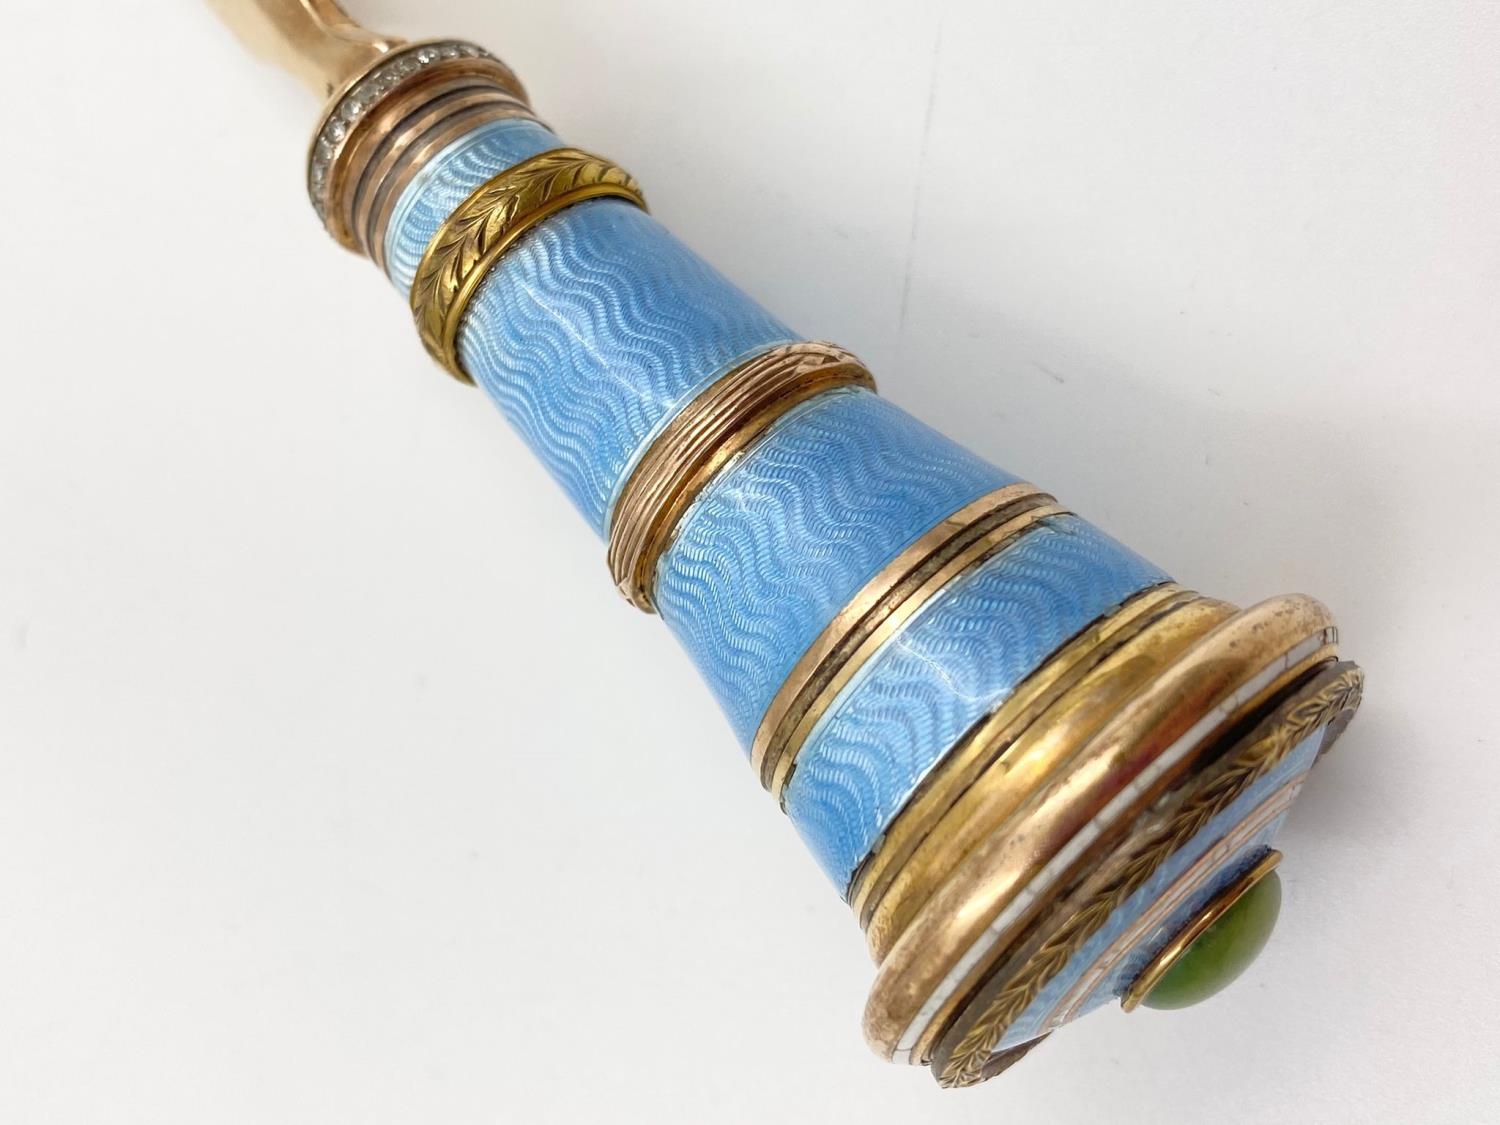 A 14K Yellow Gold, Diamond, Enamel and Jade Cartier Letter Opener. Cartier hallmarked on base of - Image 4 of 4